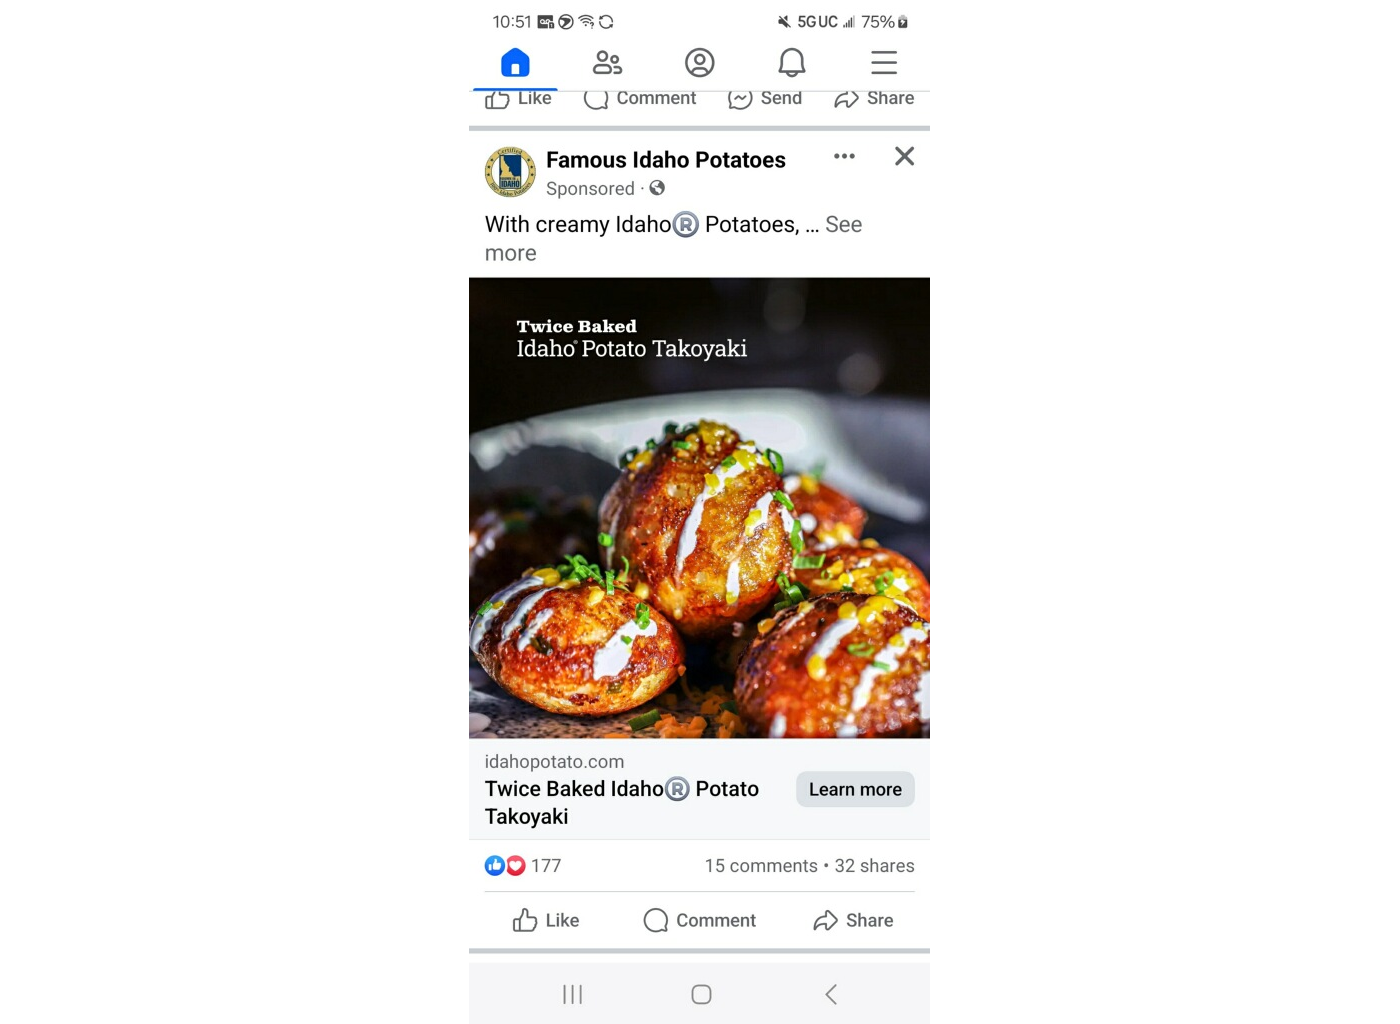 Screenshot of Facebook on Android, showing an ad for "Famous Idaho Potatoes"